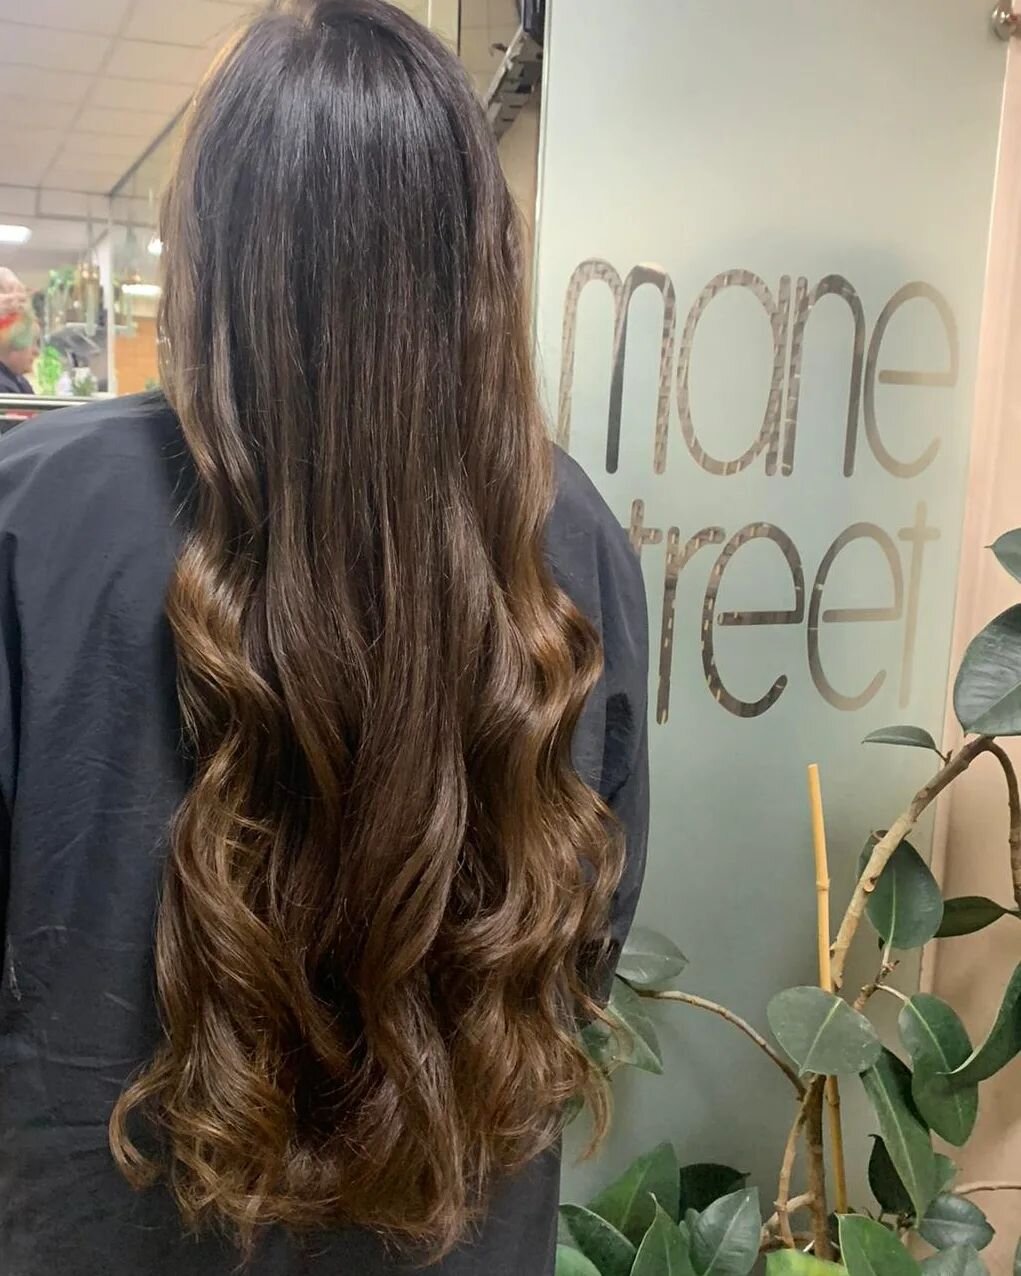 Beautiful results yesterday👌🏻One very happy client 😊
.
.
Scroll for before... 
@hairbyemmalouisee98 

#bournemouthsalon #bournemouthhair #bournemouthhairdresser #longhair #longhairgoals #beforeandafter #kevinmurphyhair #kevinmurphy #kevinmurphypro